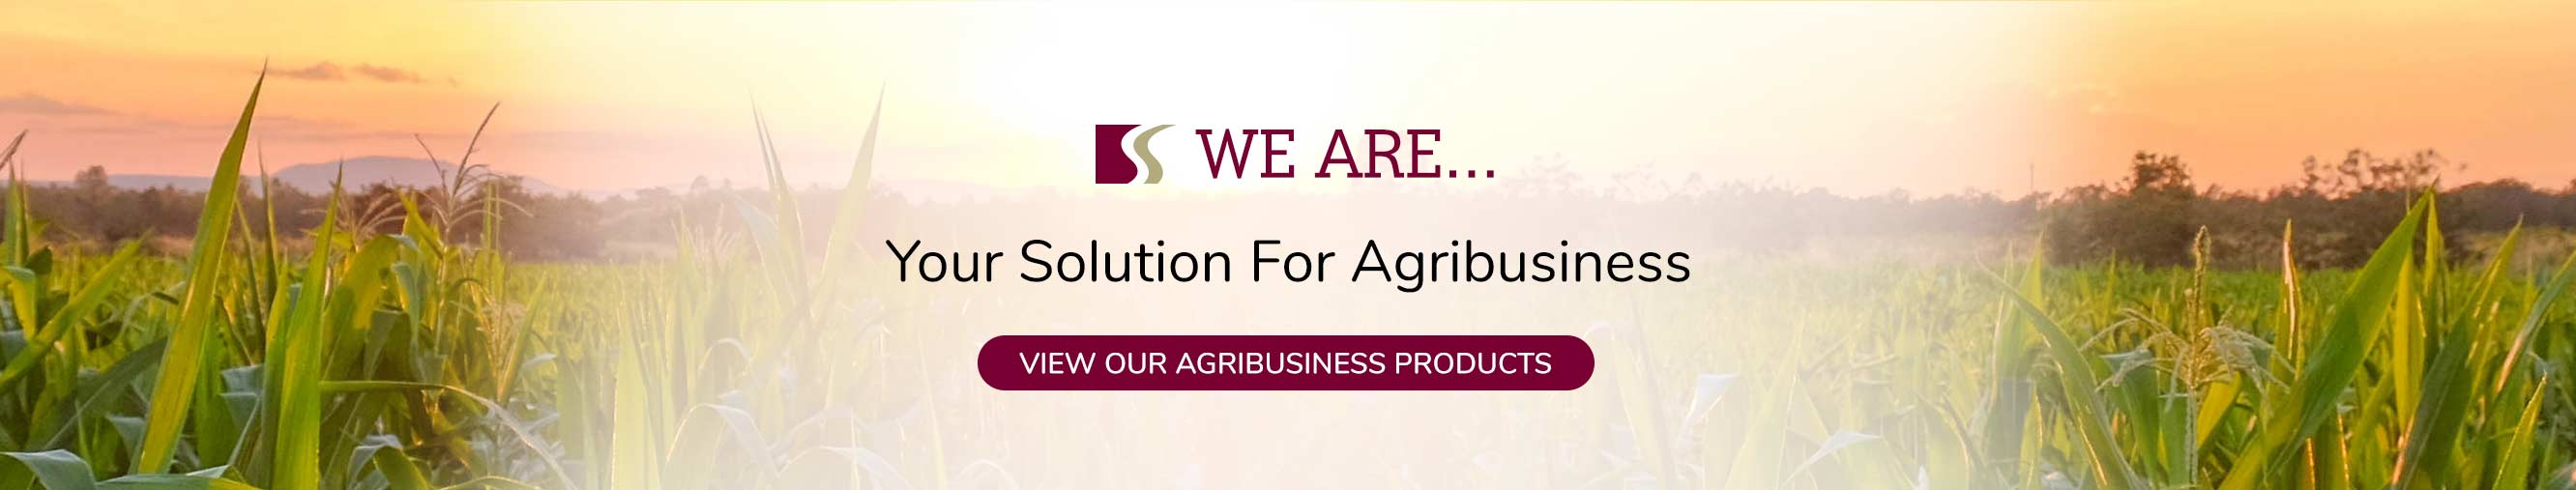 We are your solution for Agribusiness! View our agribusiness products